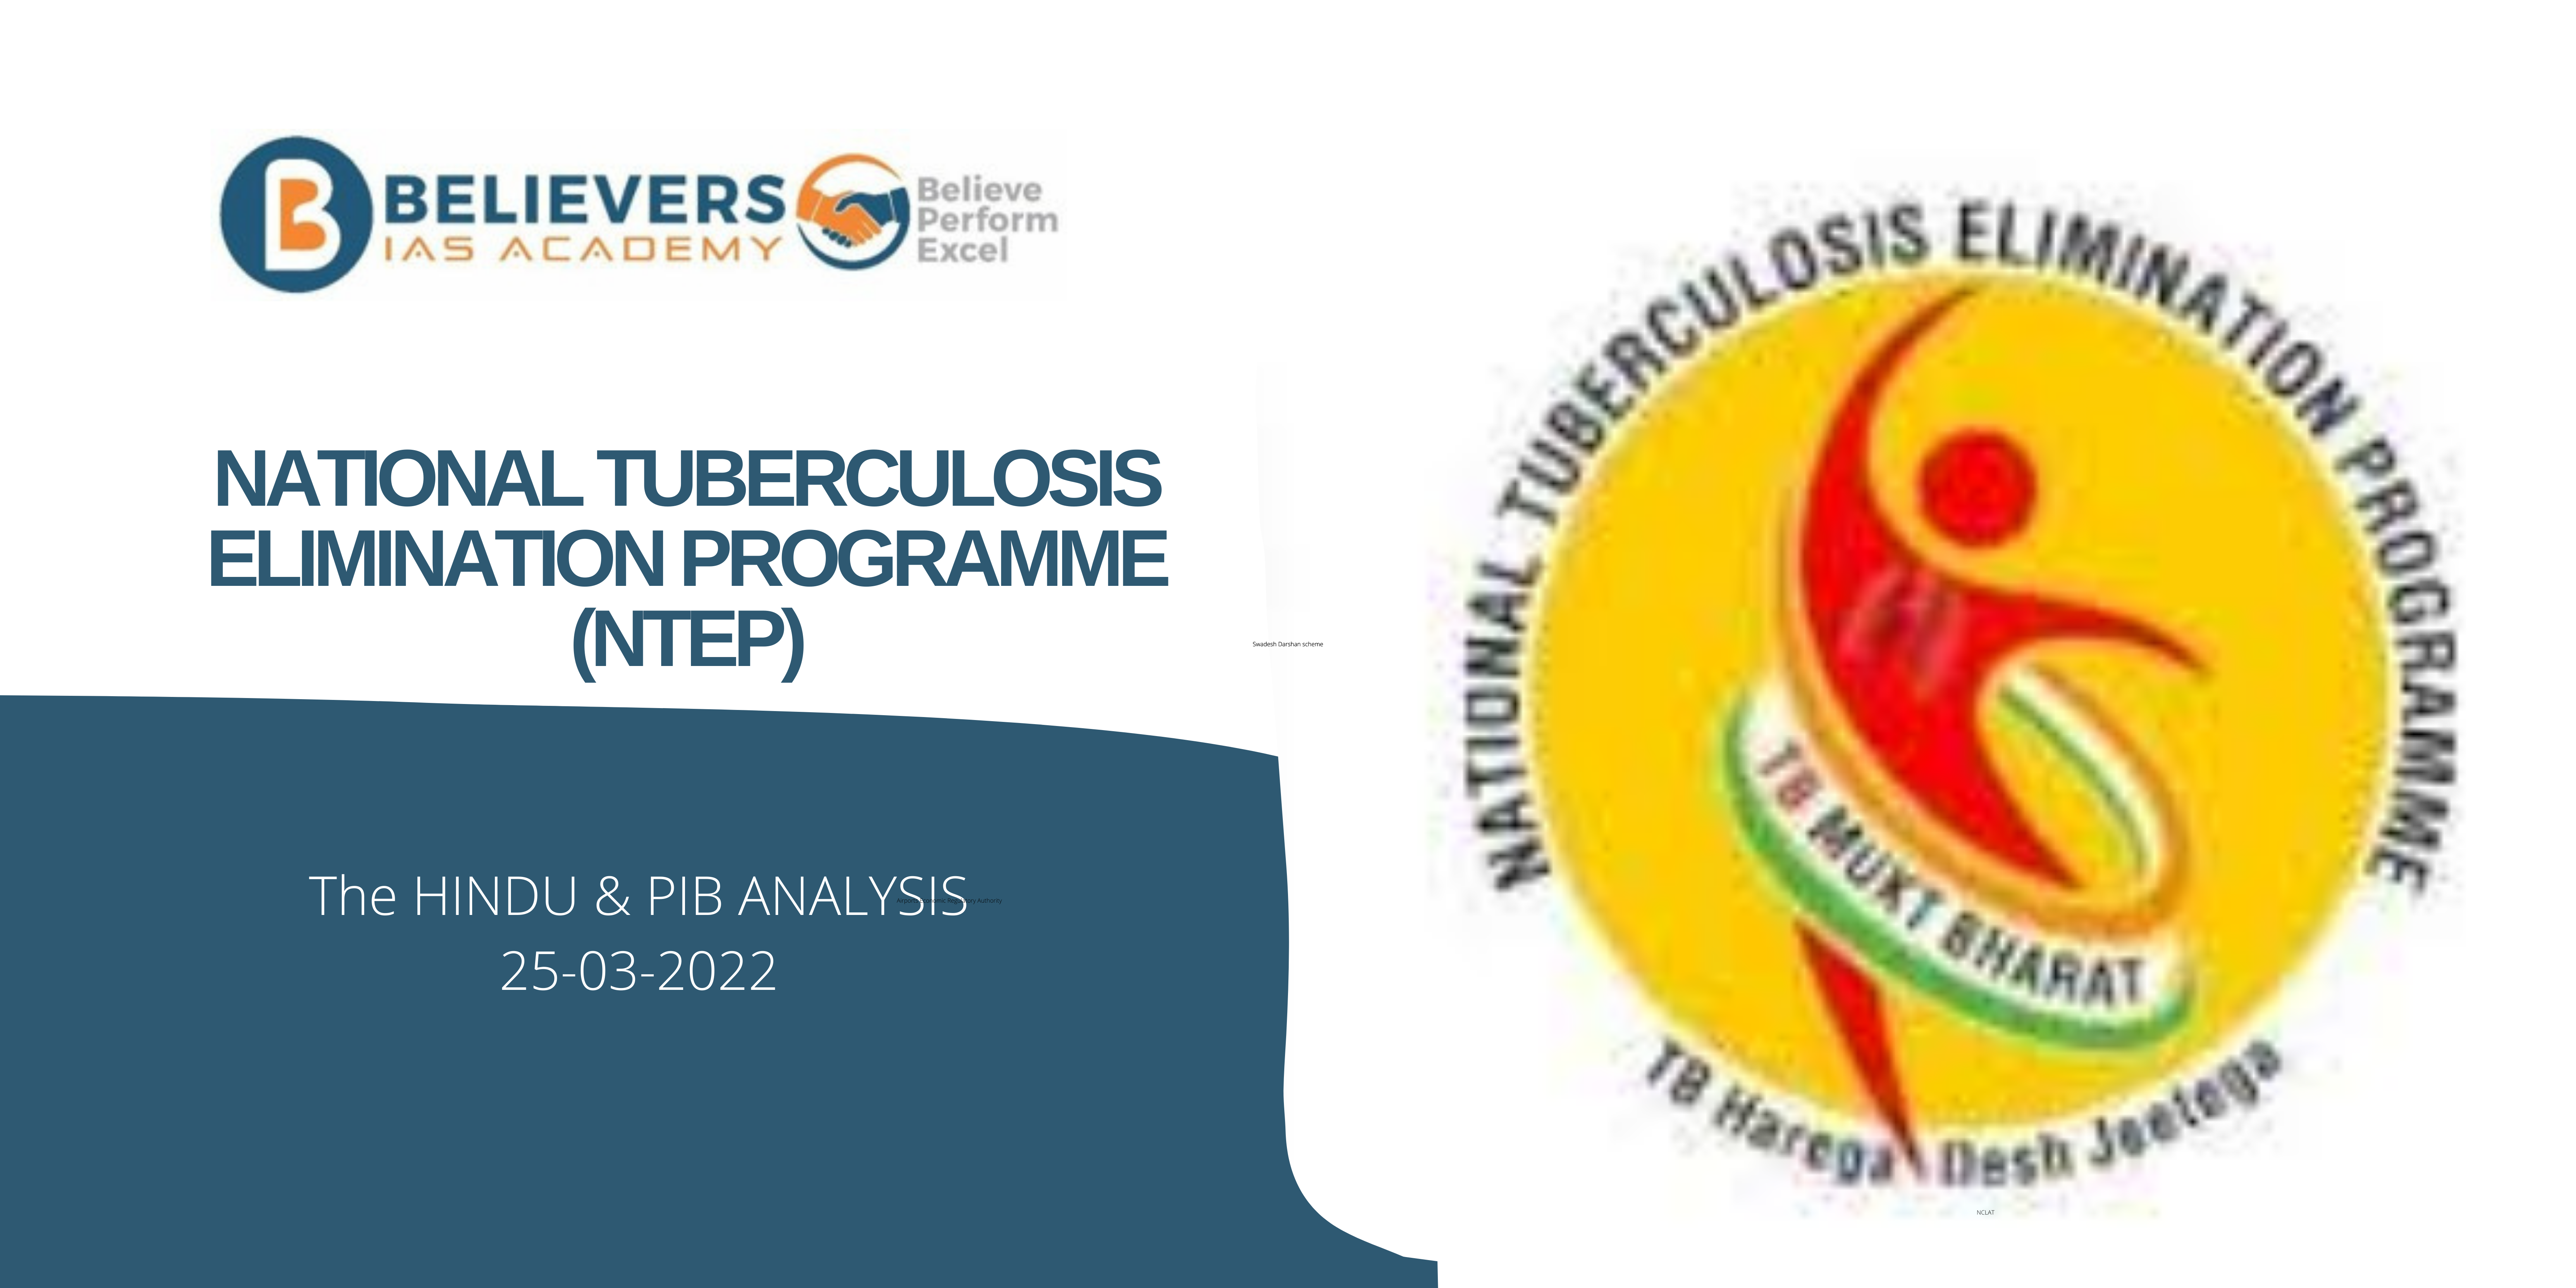 Civil services Current affairs - National Tuberculosis Elimination Programme (NTEP)